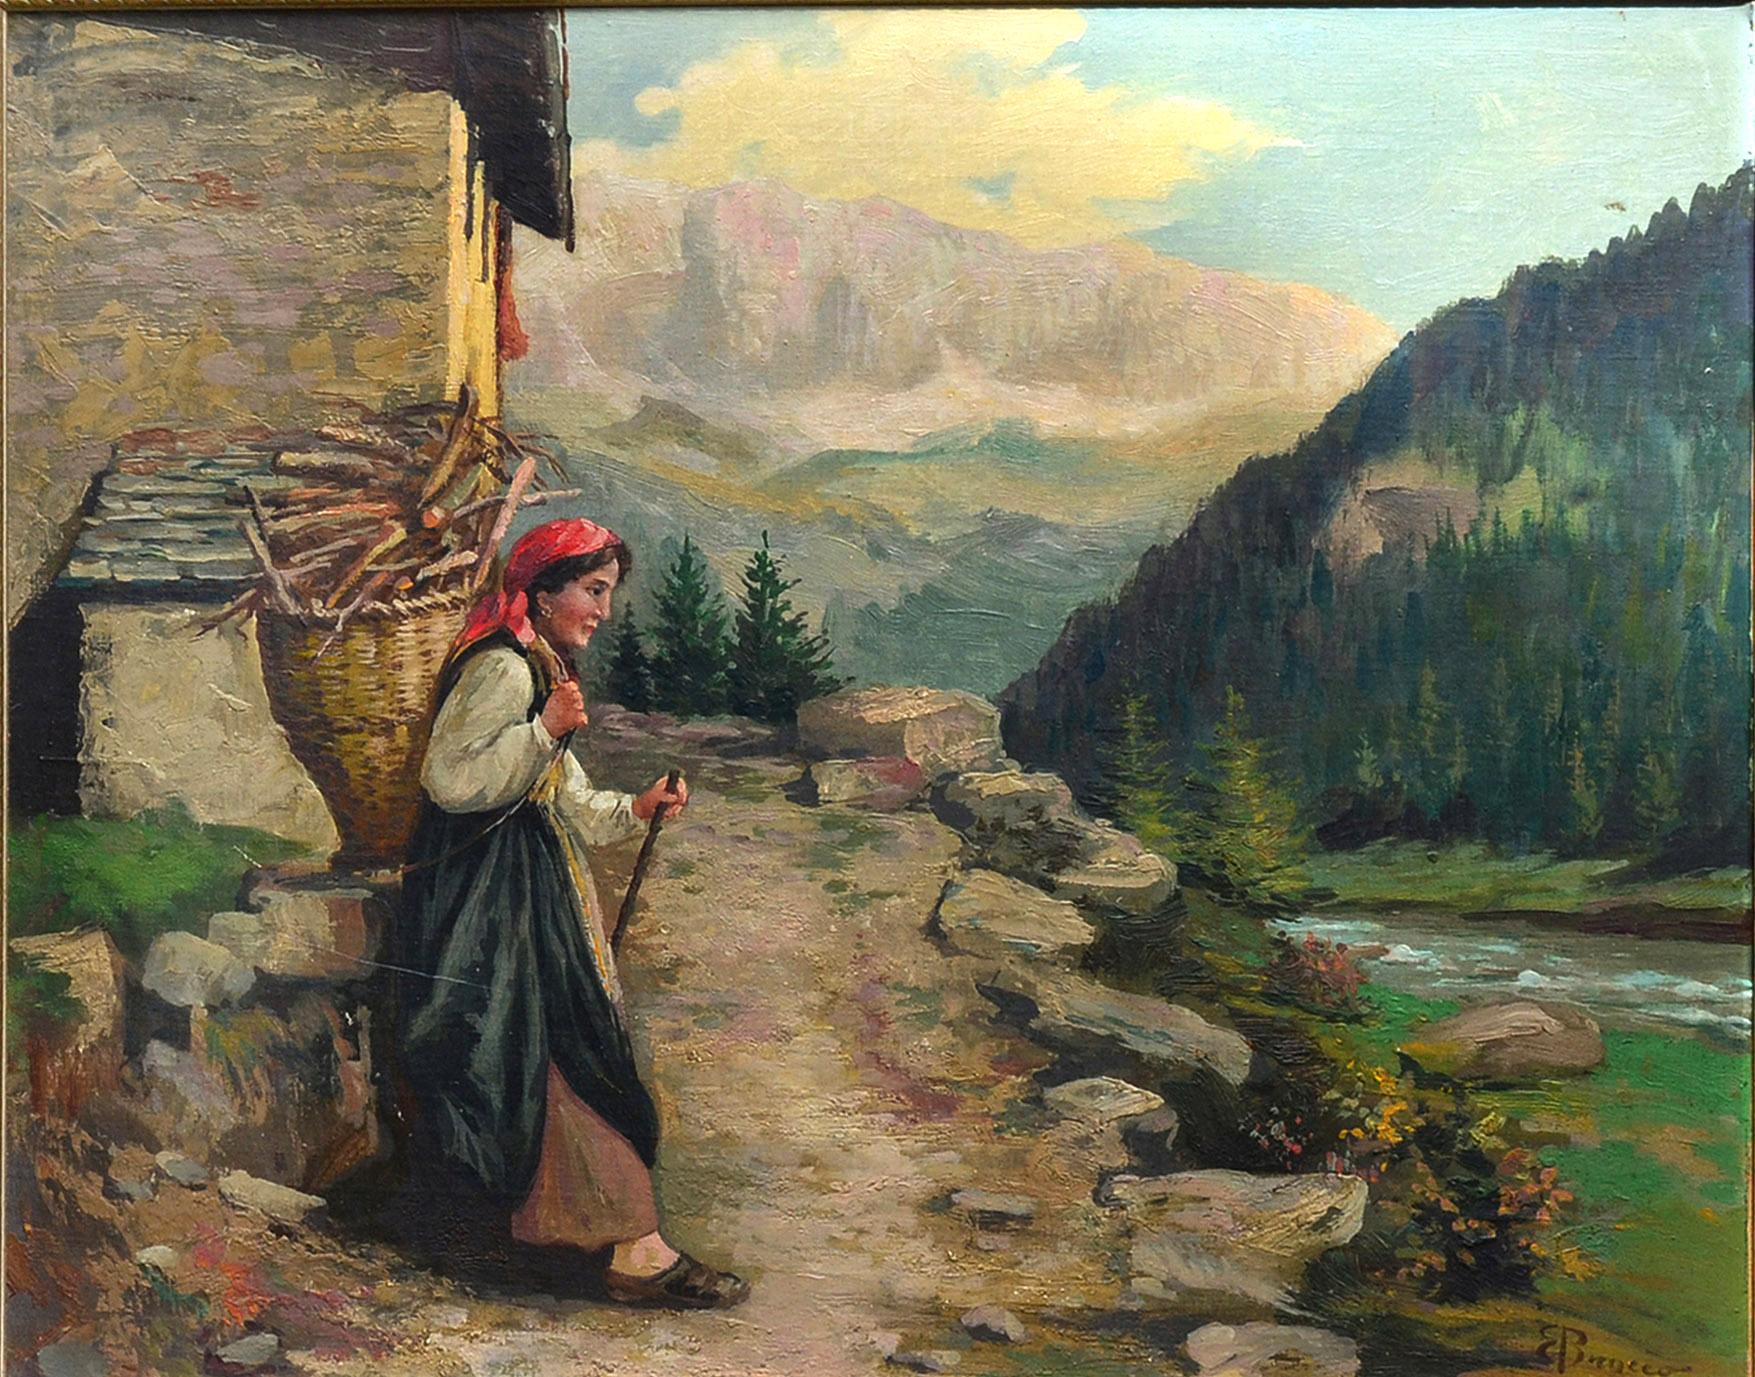 Woman Carrying Wood, Early 20th Century Figurative Landscape - Painting by Enrique Brocco